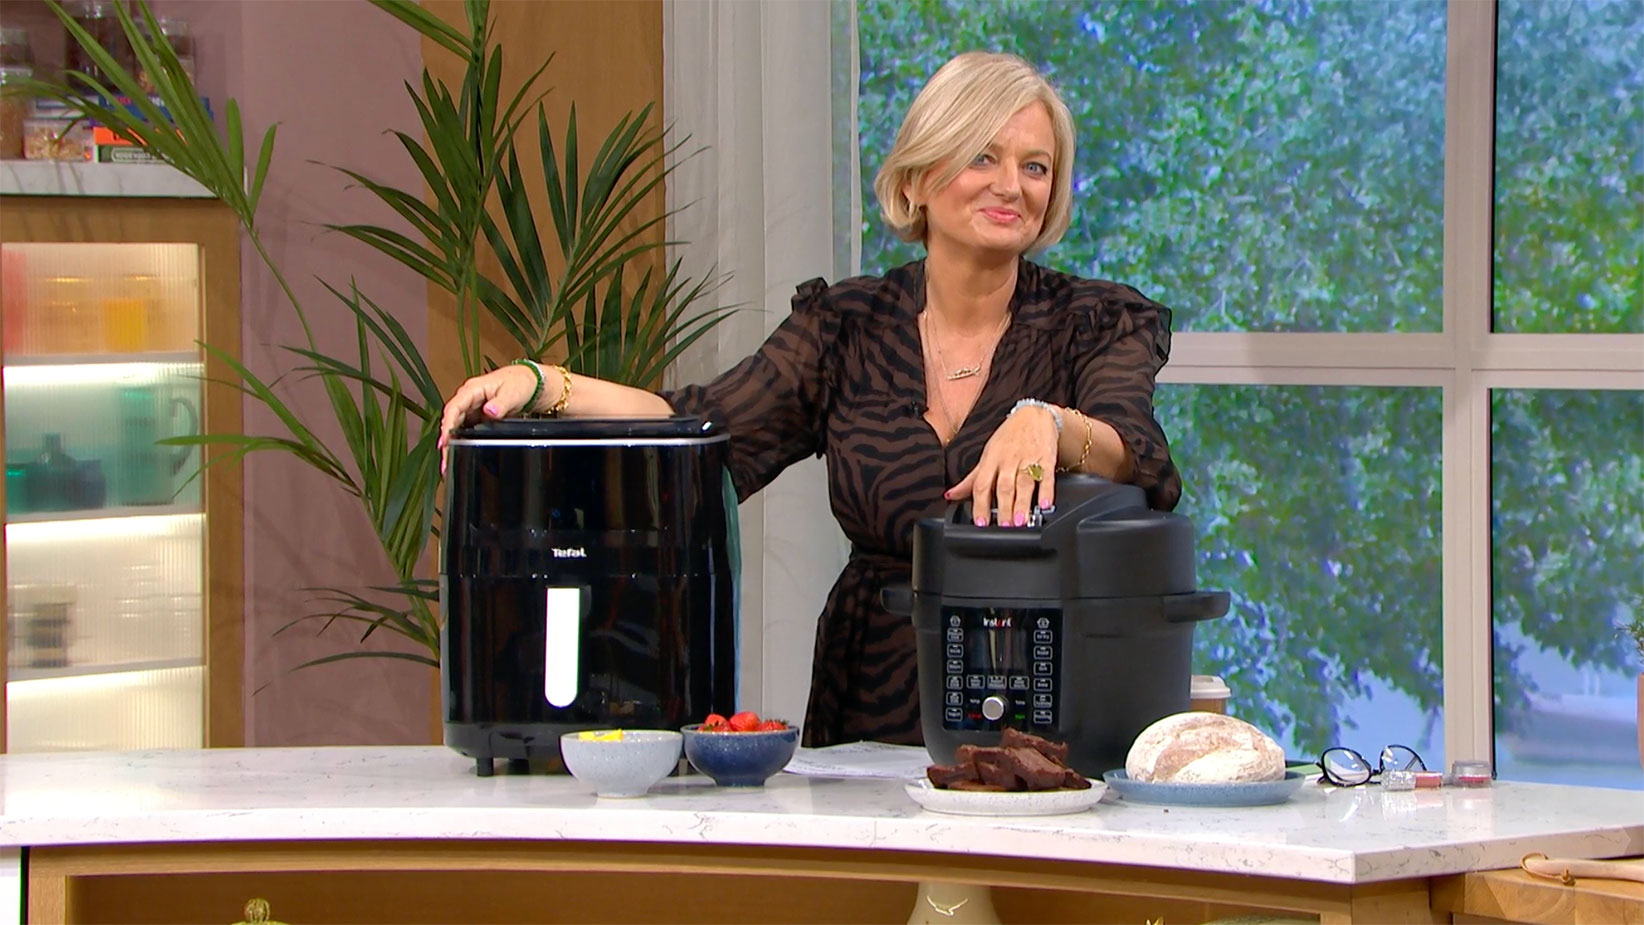 Introducing: the magic bullet Air Fryer! This kitchen must-have